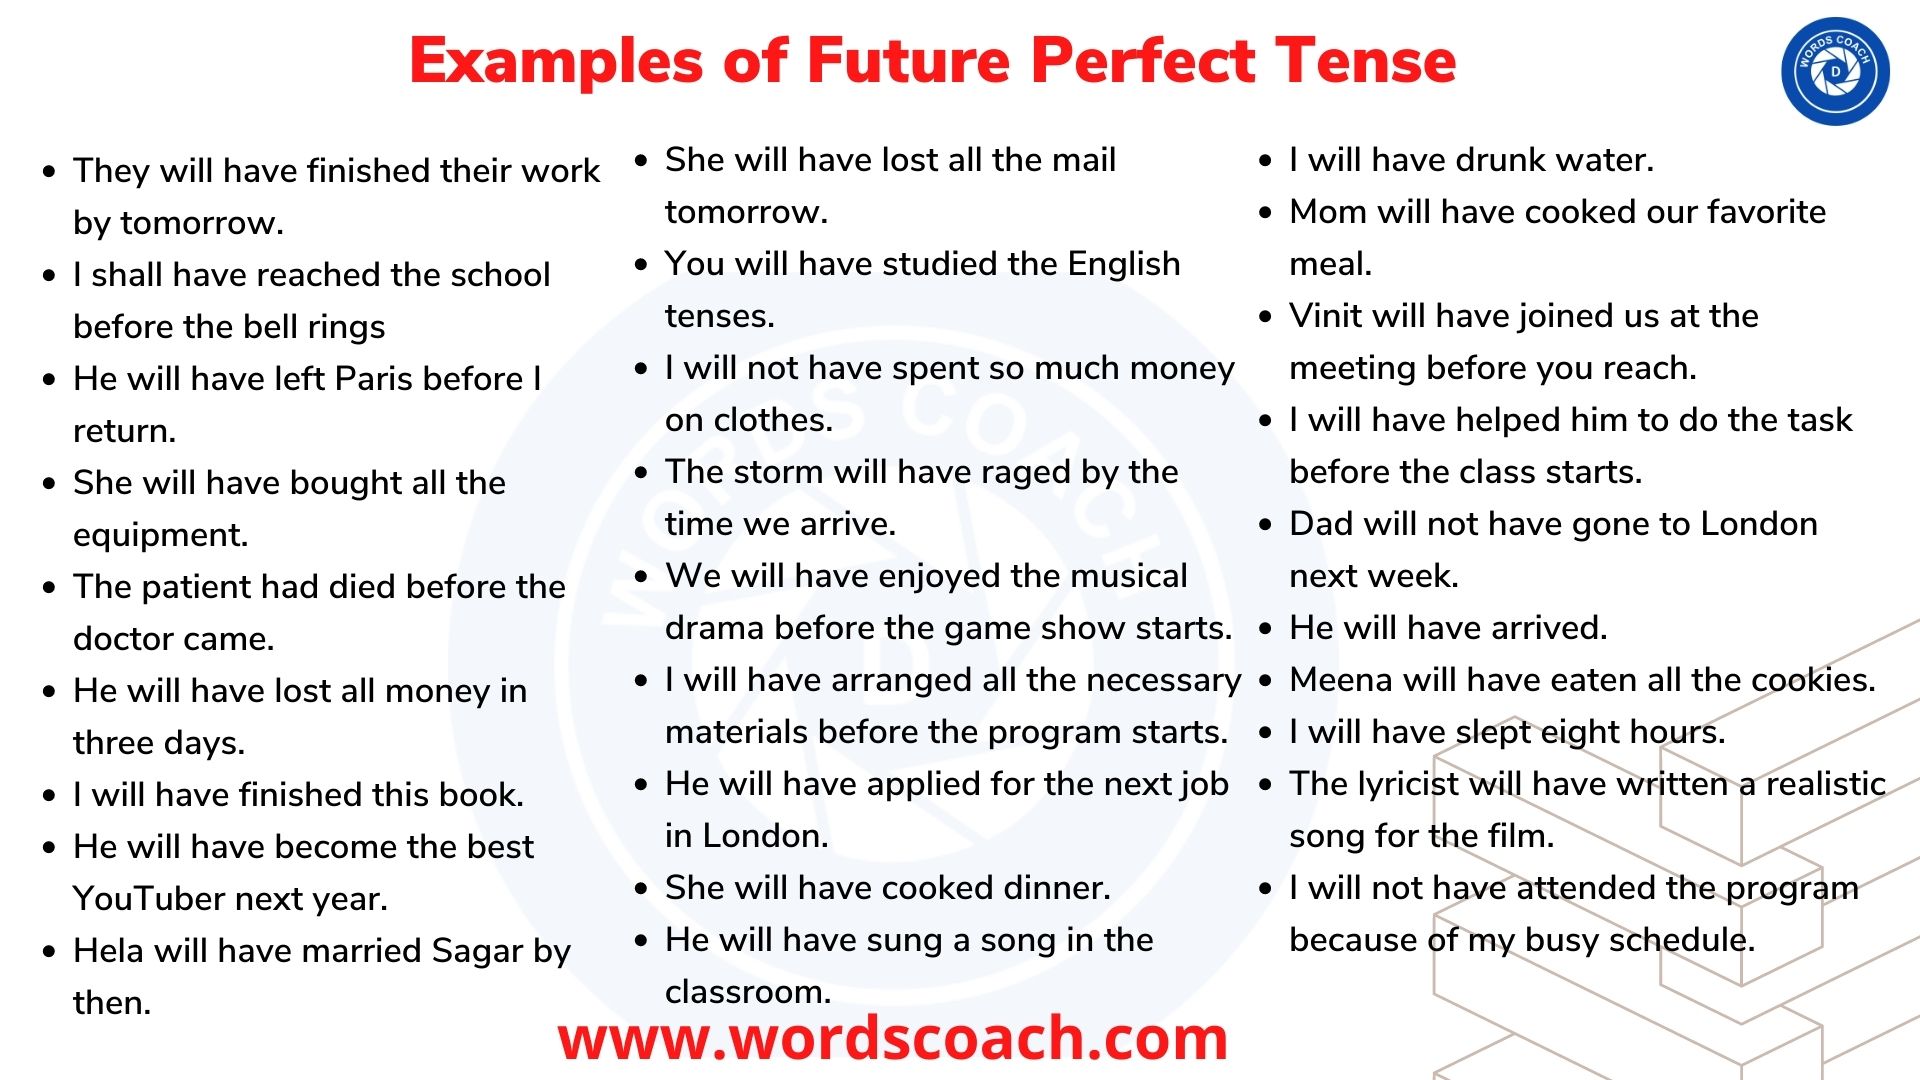 Examples of Future Perfect Tense